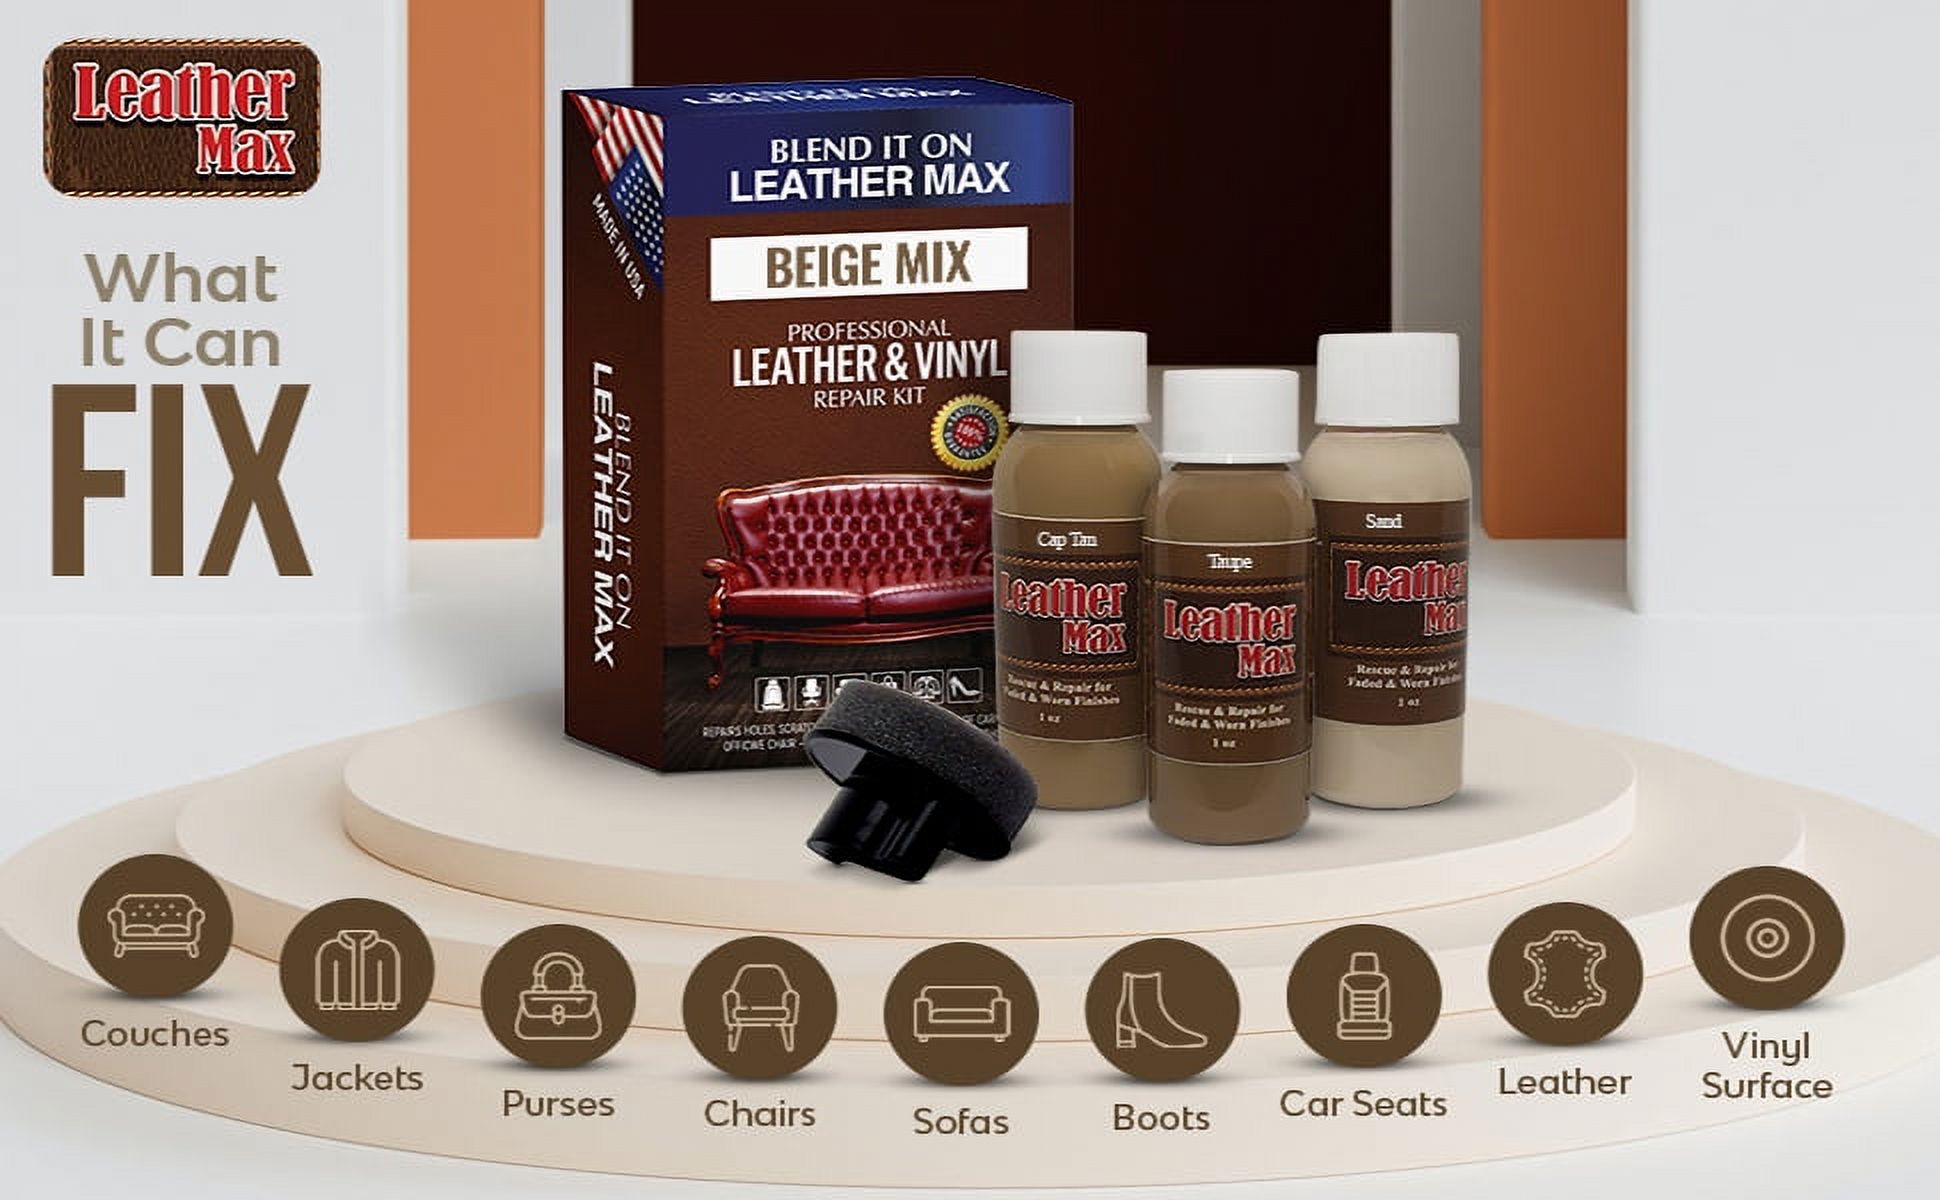 Blend It On Leather Repair and Refinish for Handbags/Shoes/Boots/Jackets/Leather Max (Beige Mix) - image 5 of 8